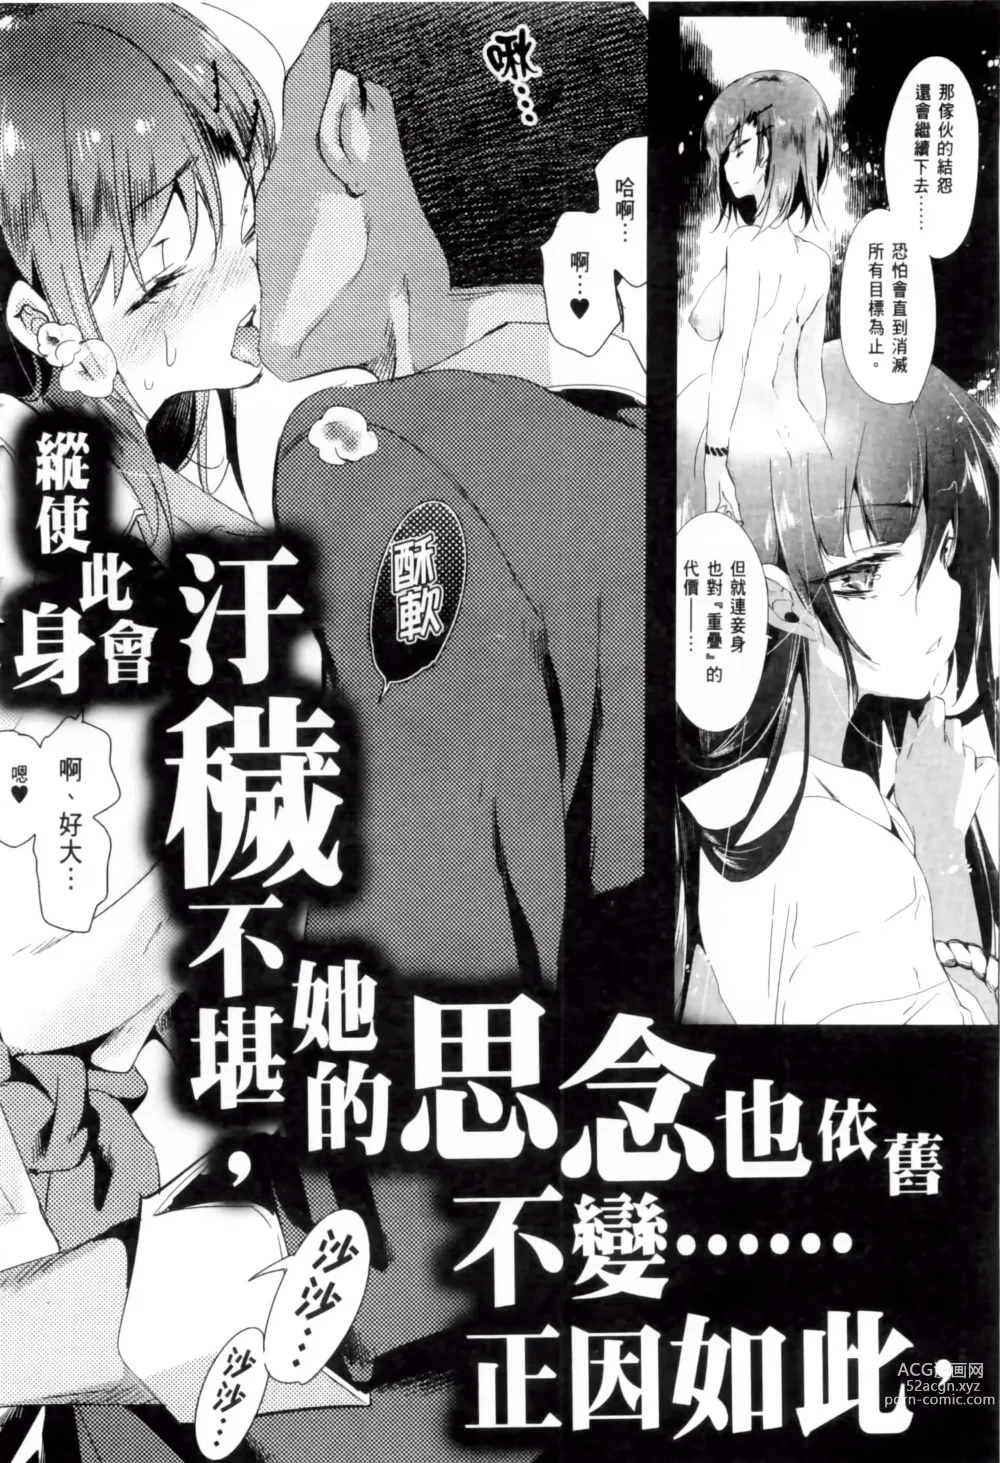 Page 192 of manga 神さまの怨結び 第2巻